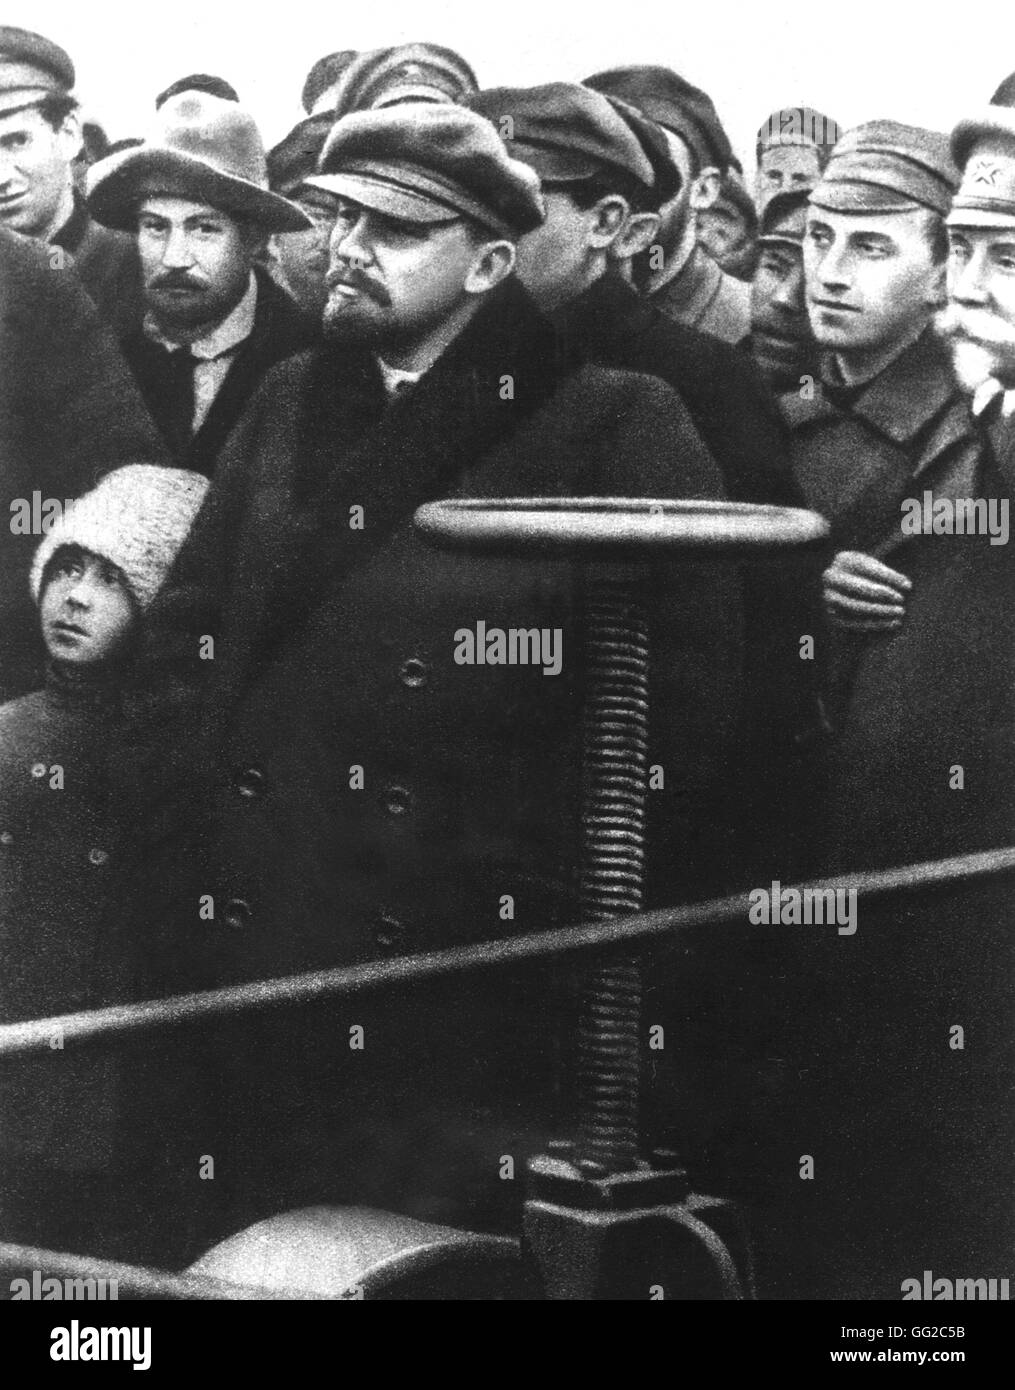 Lenin looking at the first electrical plough, manufactured in USSR by the experimental station of the Moscow Zootechnical Institute, the day it is tested at the Timiryazev Agricultural Academy October 22, 1921 U.S.S.R. Stock Photo